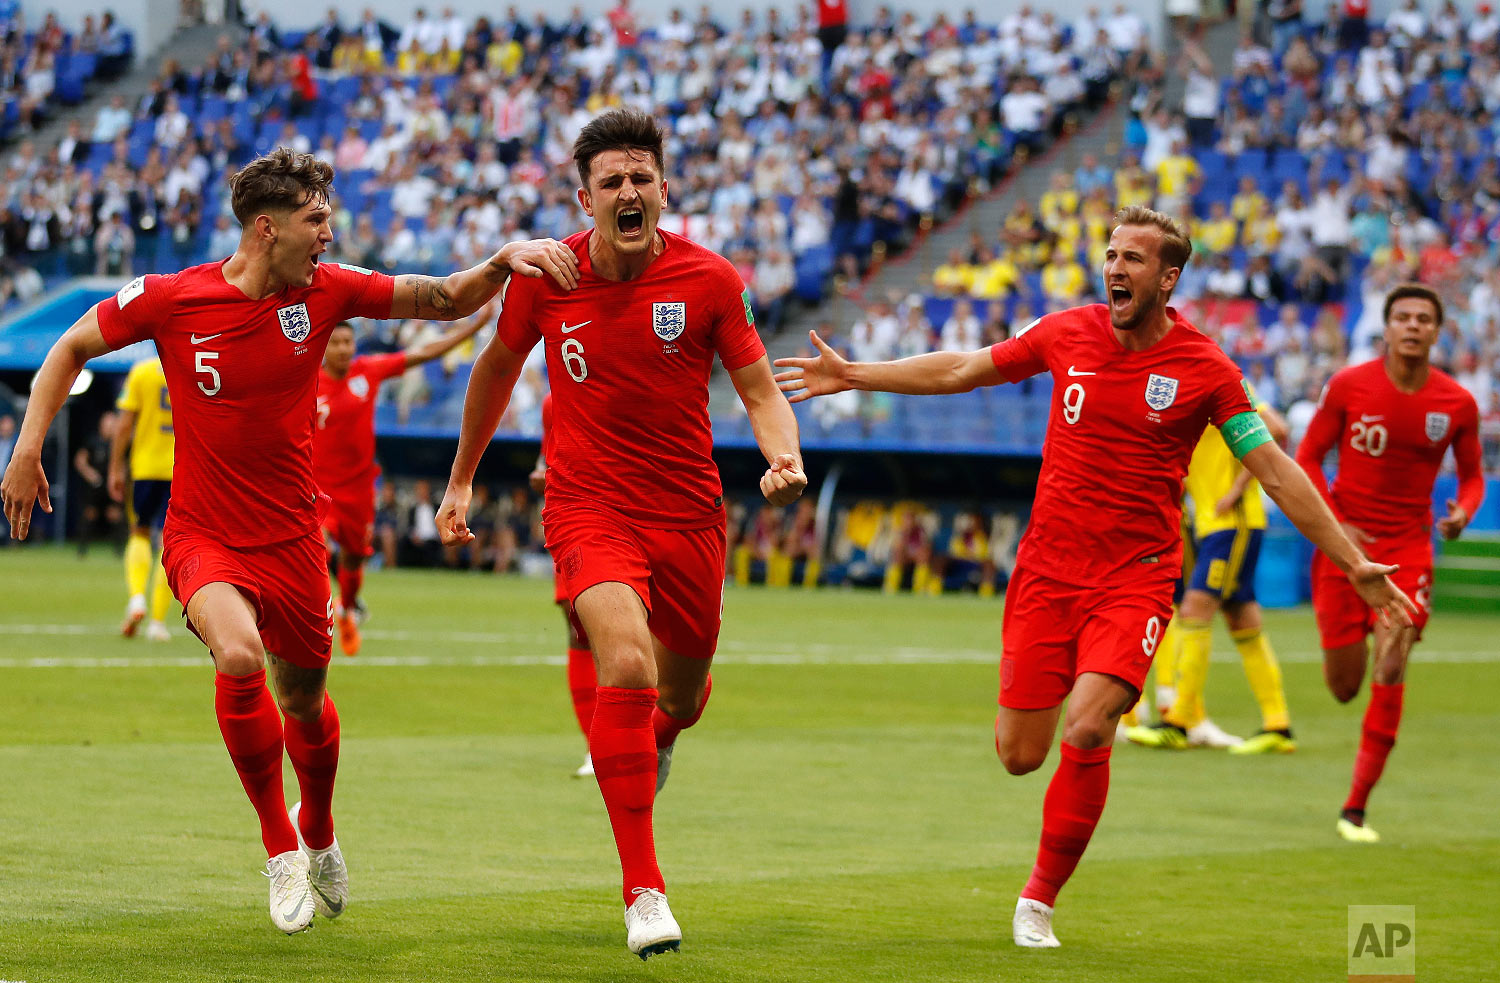  England's Harry Maguire, center, celebrates with his teammates after scoring his side opening goal during the quarterfinal match between Sweden and England at the 2018 soccer World Cup in the Samara Arena, in Samara, Russia, Saturday, July 7, 2018. 